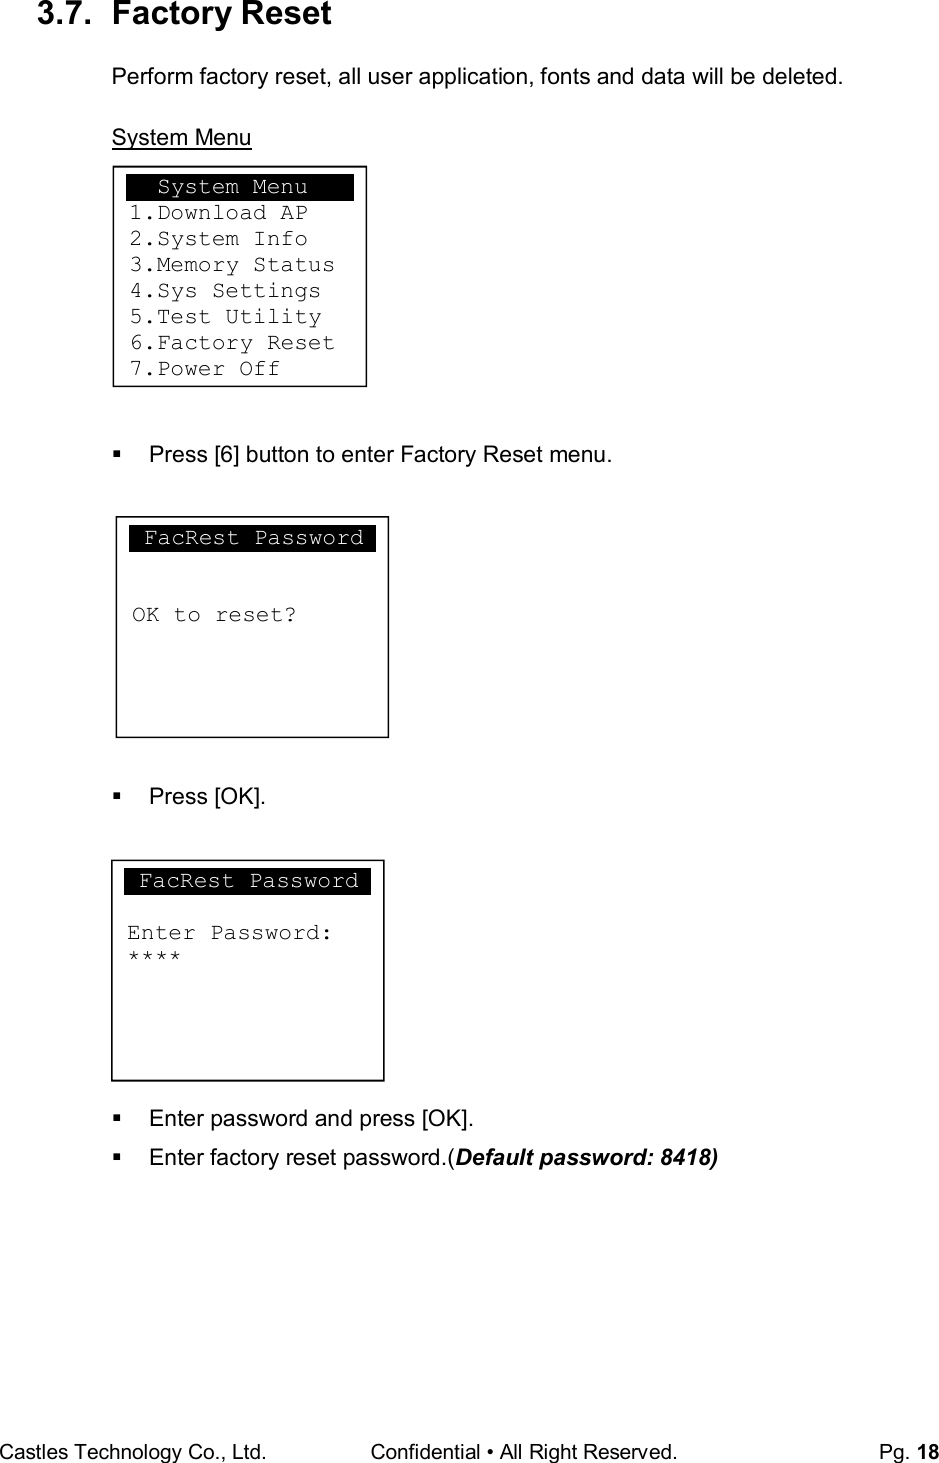 Castles Technology Co., Ltd. Confidential • All Right Reserved.  Pg. 18  3.7.  Factory Reset Perform factory reset, all user application, fonts and data will be deleted.  System Menu          Press [6] button to enter Factory Reset menu.             Press [OK].            Enter password and press [OK].   Enter factory reset password.(Default password: 8418)         System Menu 1.Download AP 2.System Info 3.Memory Status 4.Sys Settings 5.Test Utility 6.Factory Reset 7.Power Off FacRest Password  Enter Password: ****  FacRest Password   OK to reset?  